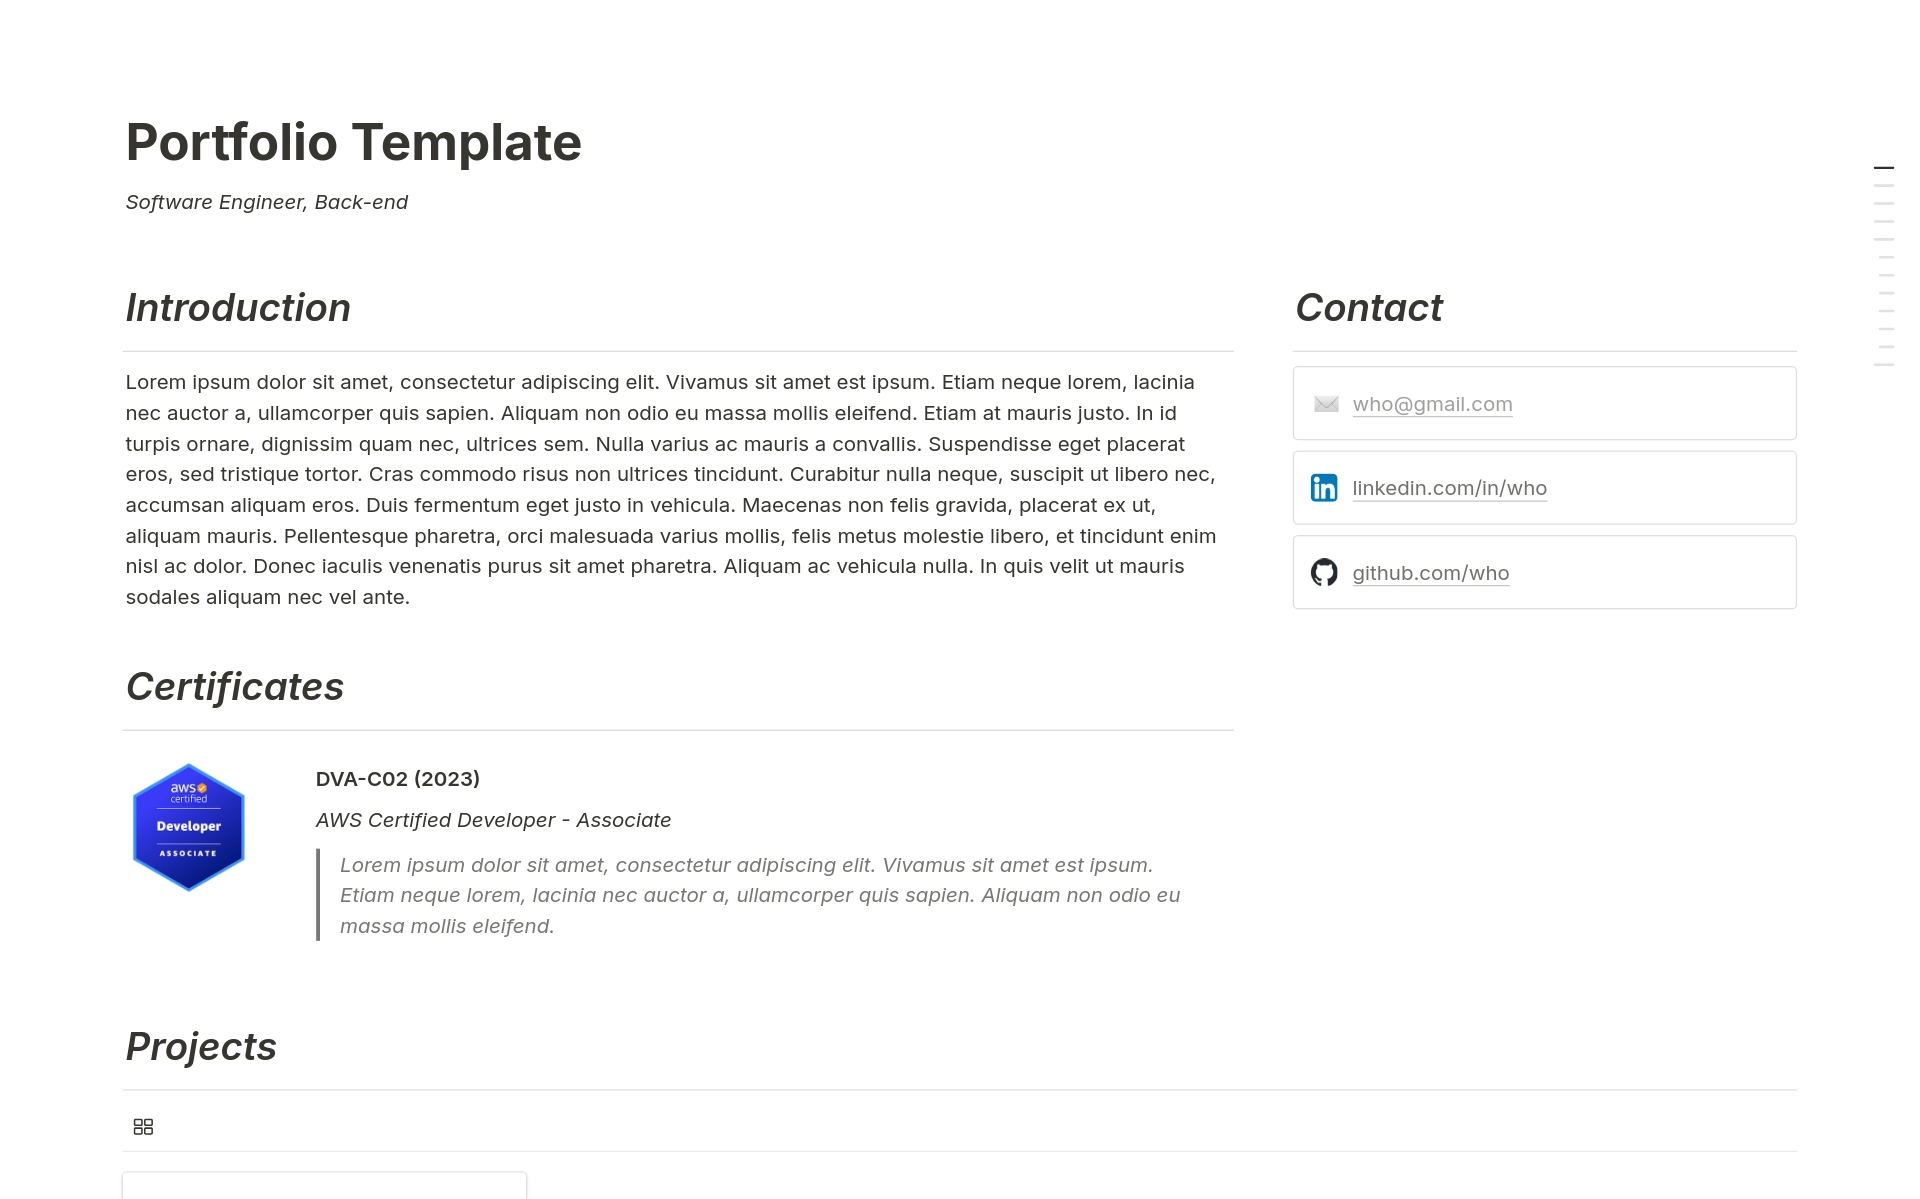 This portfolio template is a comprehensive template designed to showcase your skills, projects, certifications. Ideal for software engineers, it includes sections for skill stacks; languages, frameworks, databases, or whatever you add.